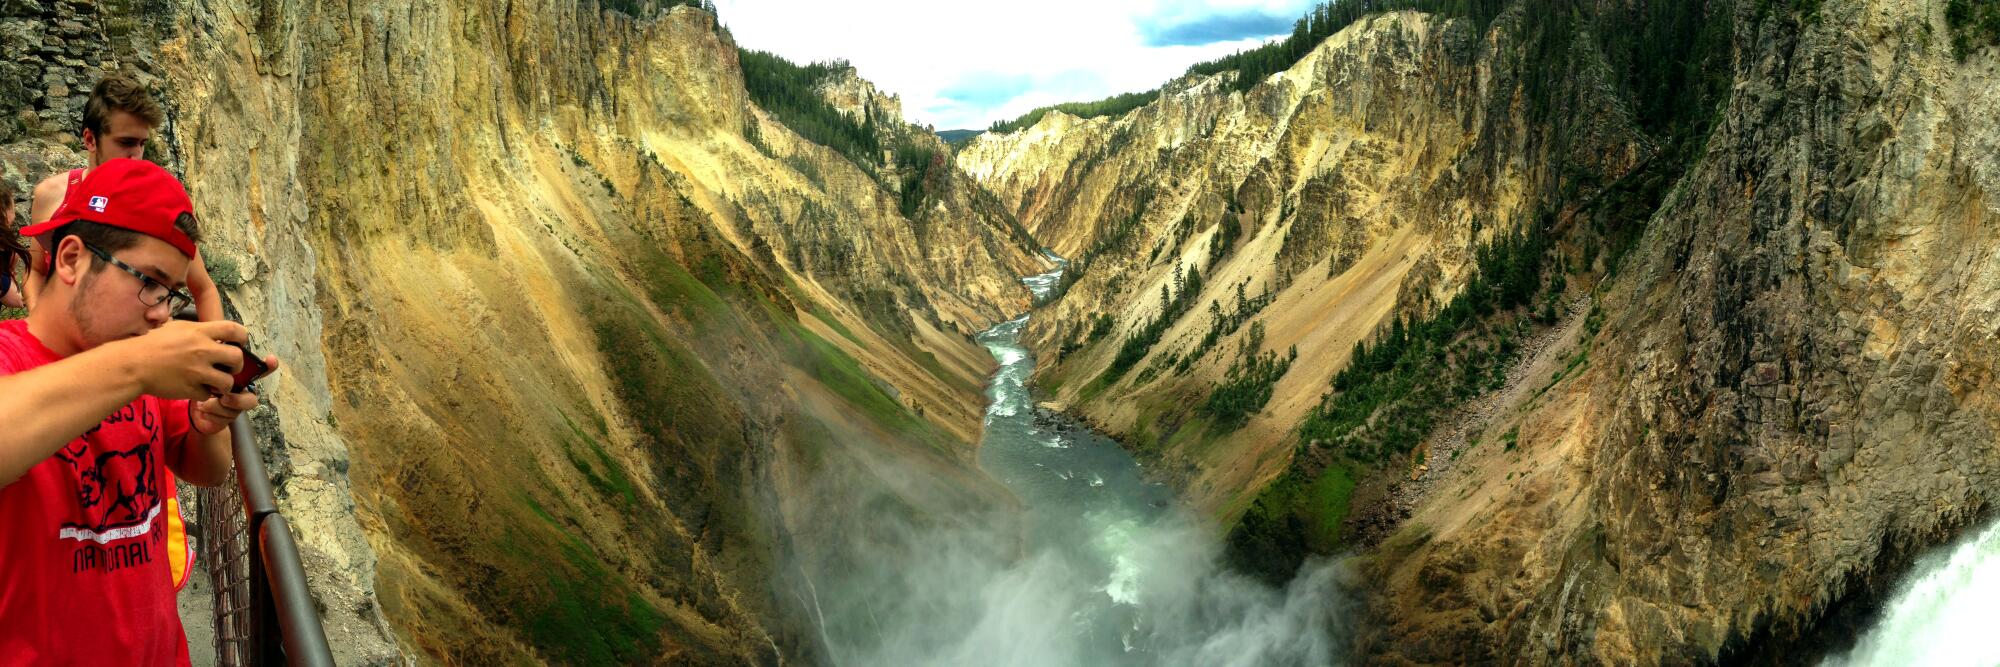 Grand Canyon of the Yellowstone, Yellowstone National Park, with two people looking over a rail at water running past below.